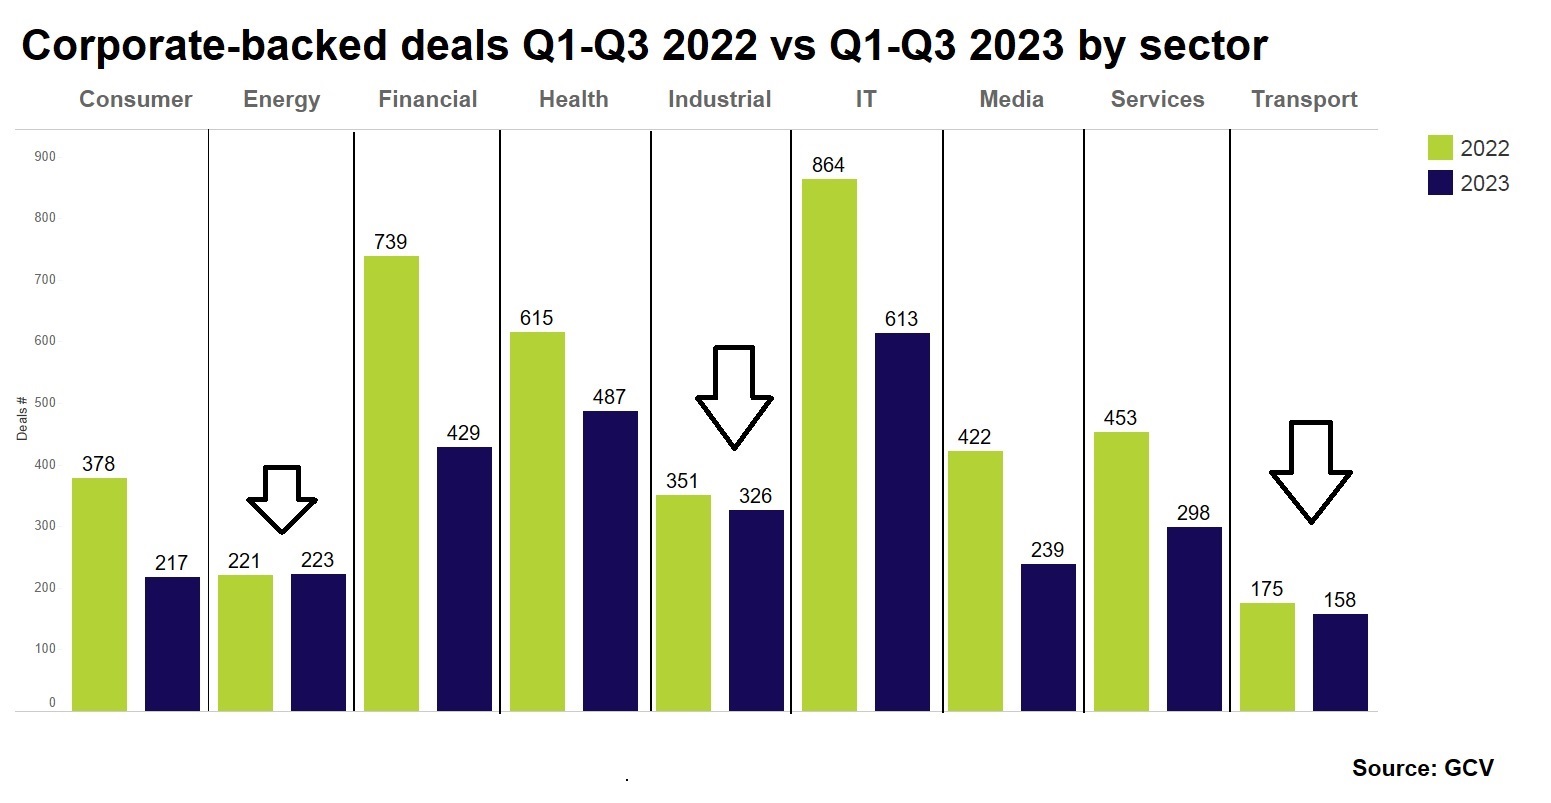 Vertical bar chart showing corporate-backed deals from Q1-Q3 2022 vs Q1-Q3 2023 by sector. Source: GCV